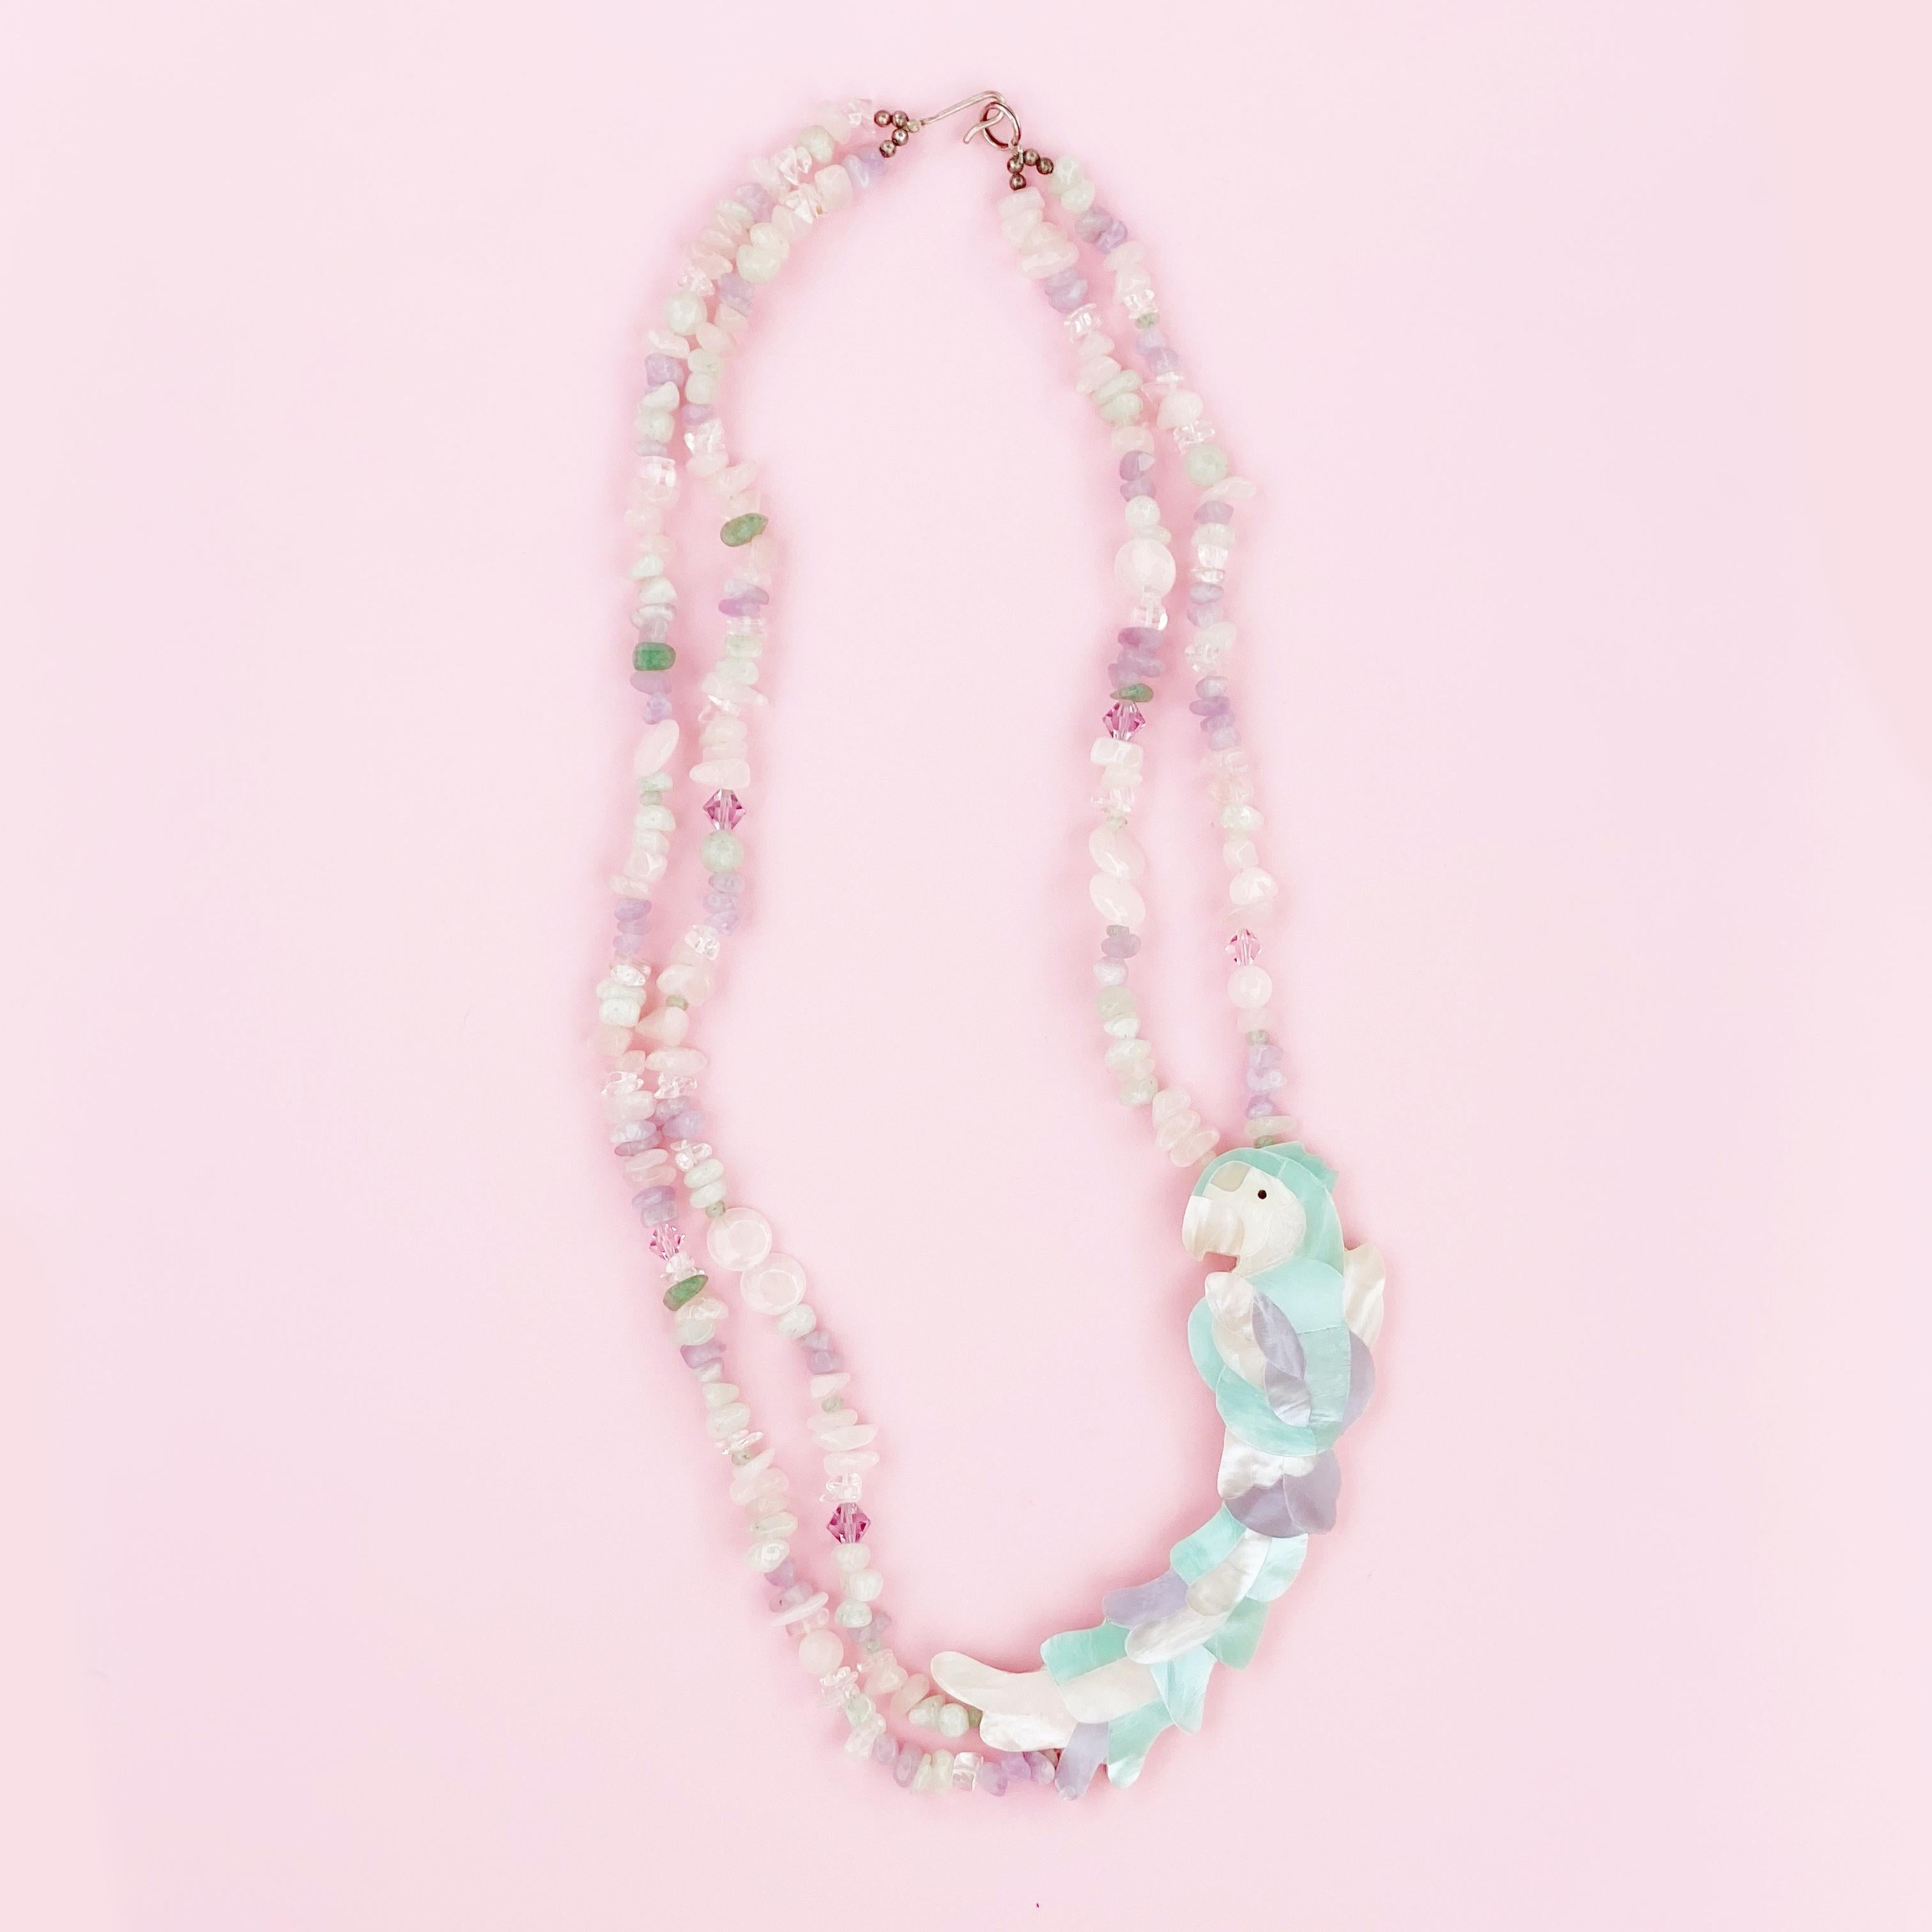 Modern Pastel Mother of Pearl Parrot Necklace With Quartz Gemstones By Lee Sands, 1980s